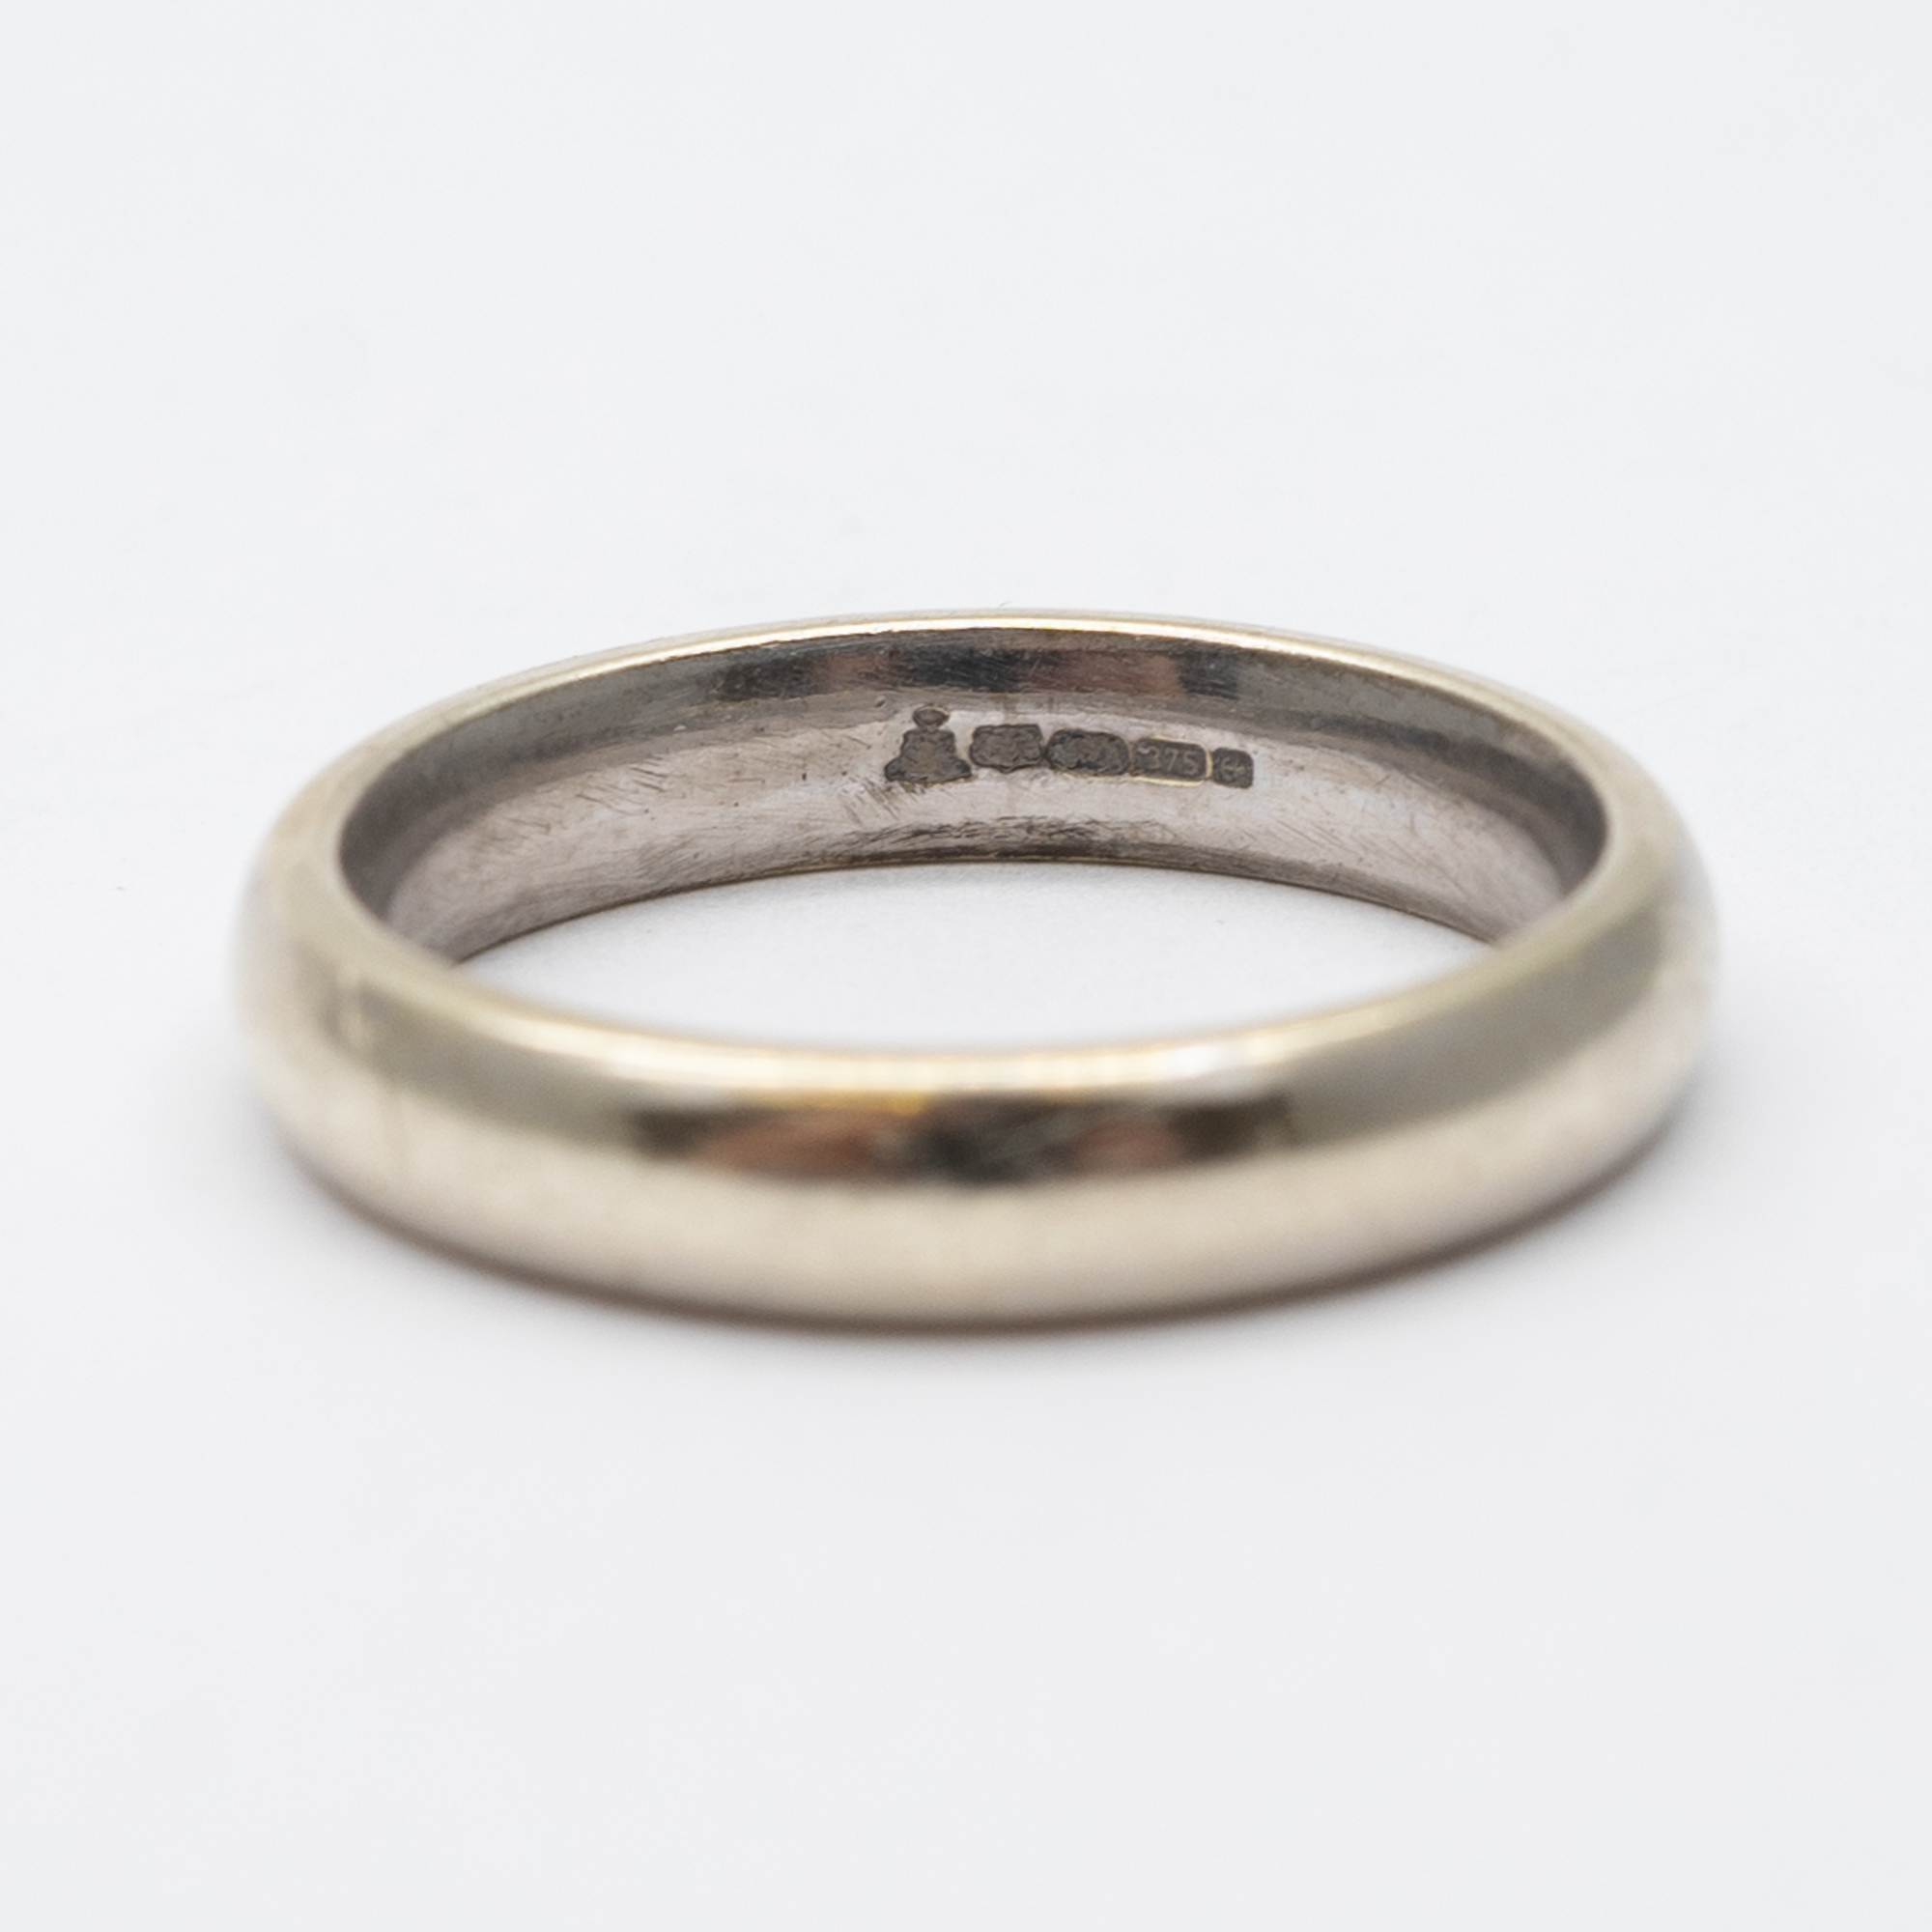 A 9ct white gold wedding band - Image 3 of 3